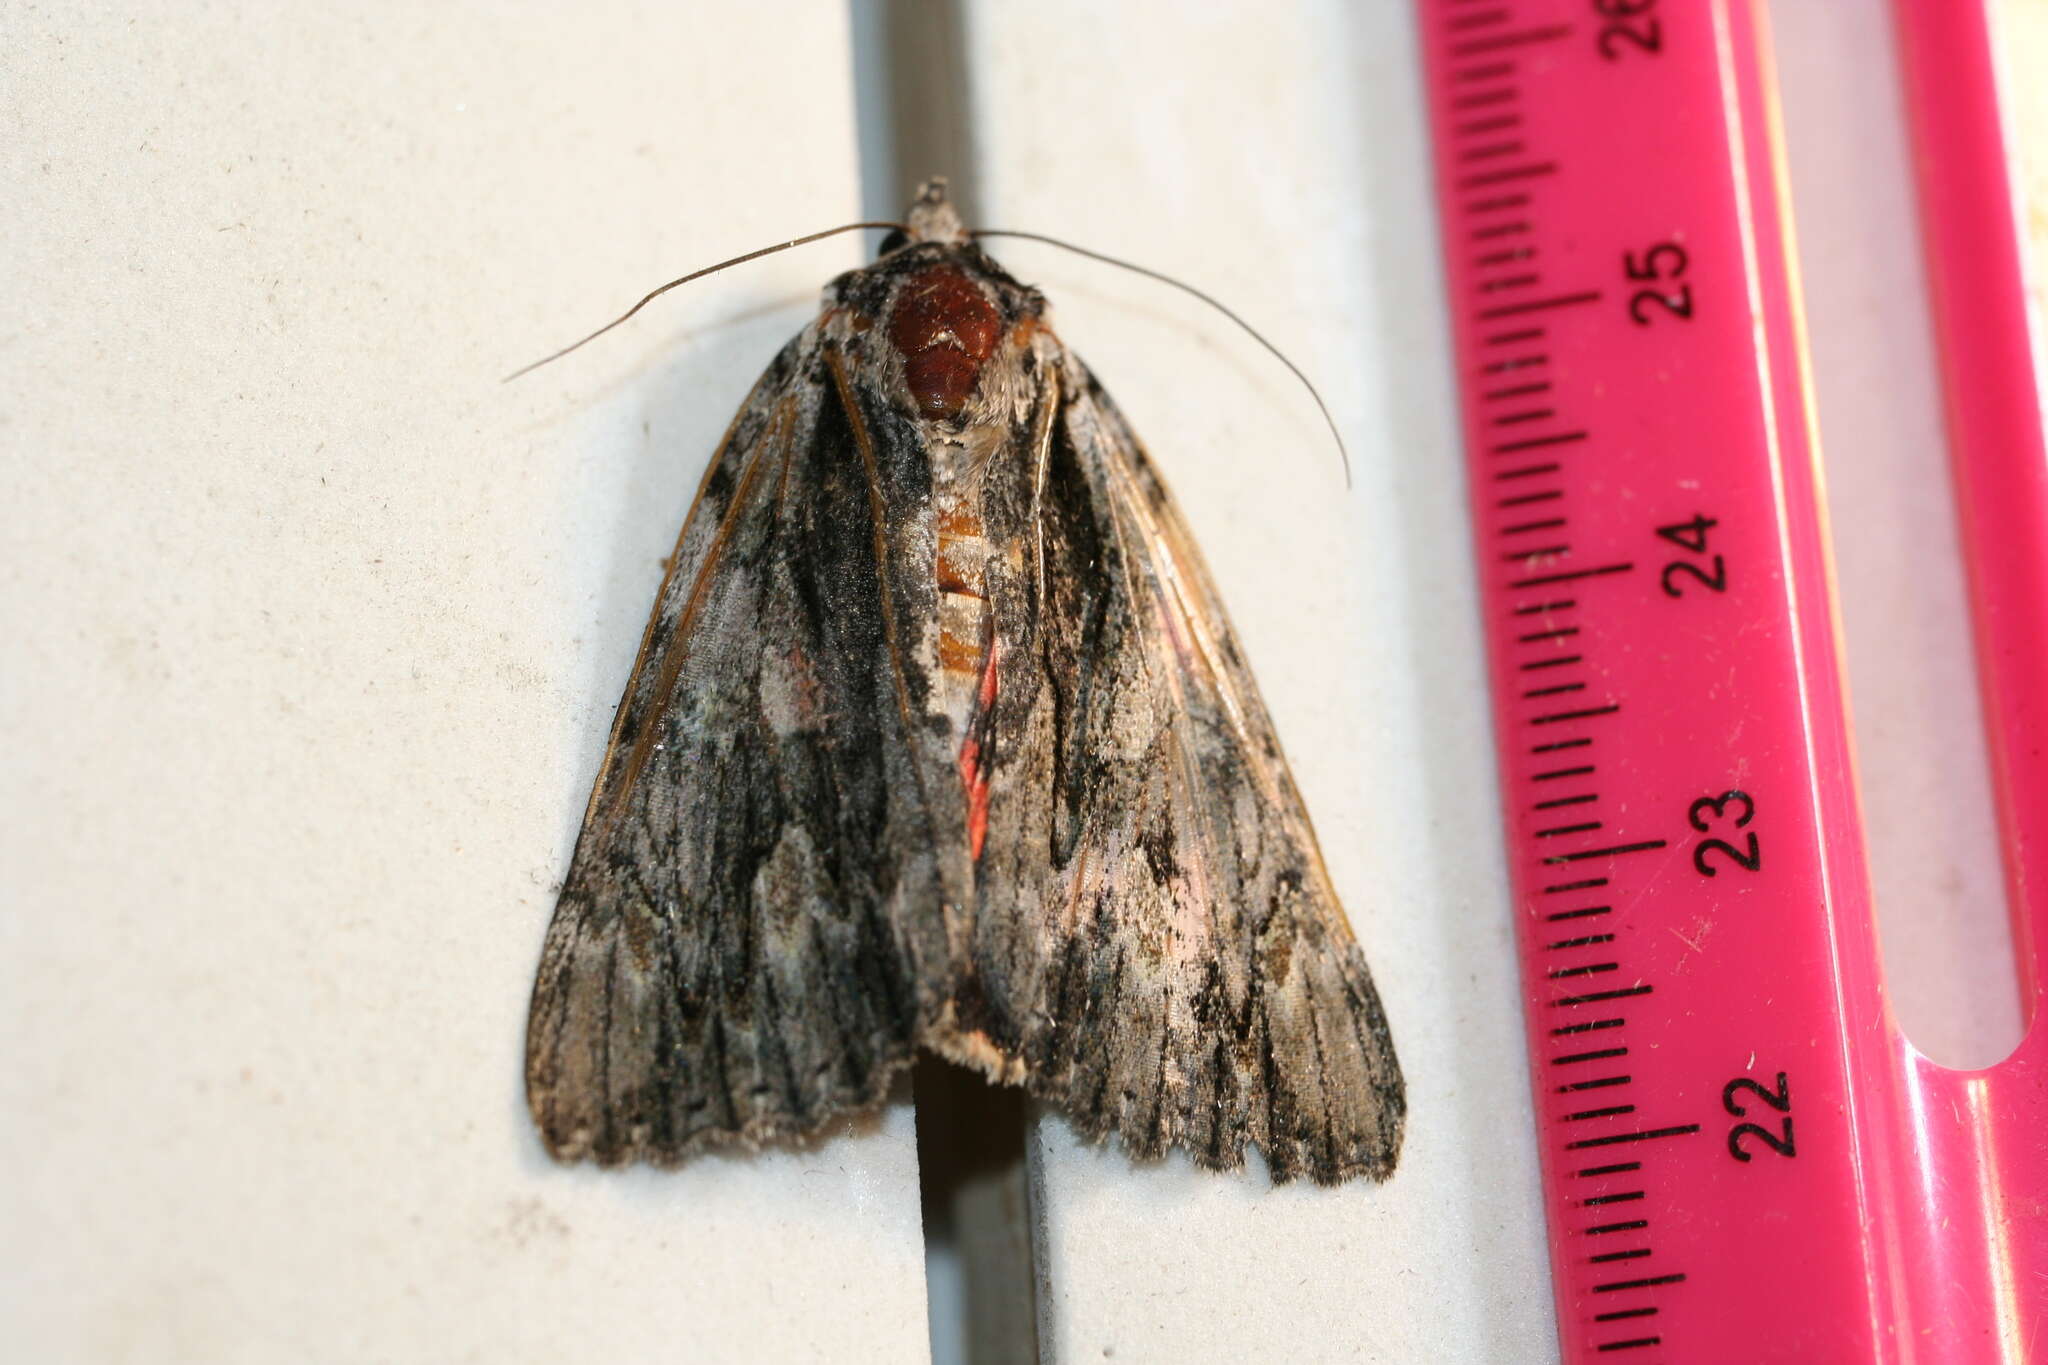 Image of Scarlet Underwing